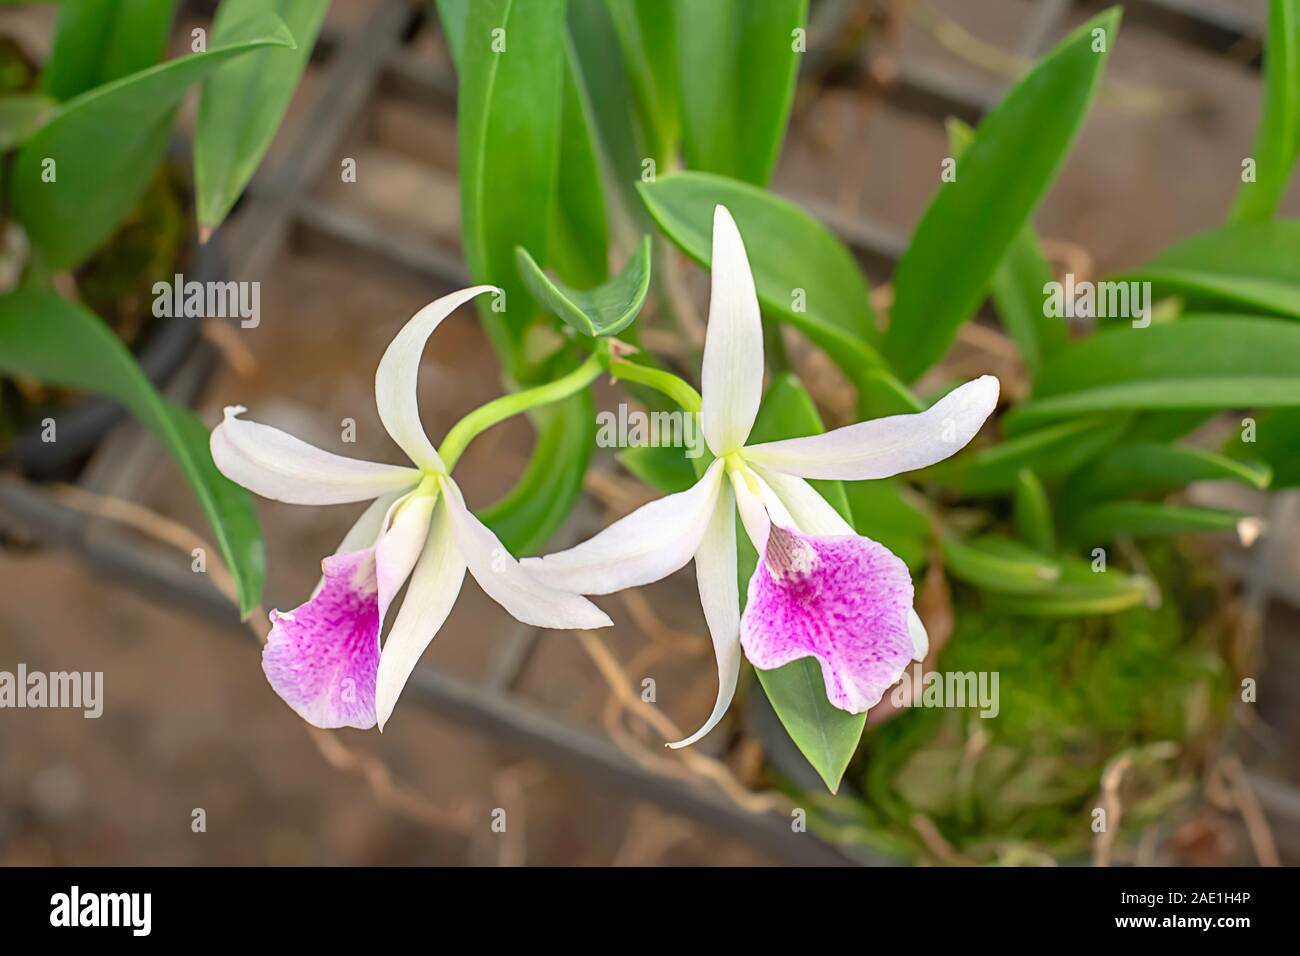 Beautiful White Cattleya Orchid and patterned pink spots Background blurred leaves in the garden. Stock Photo